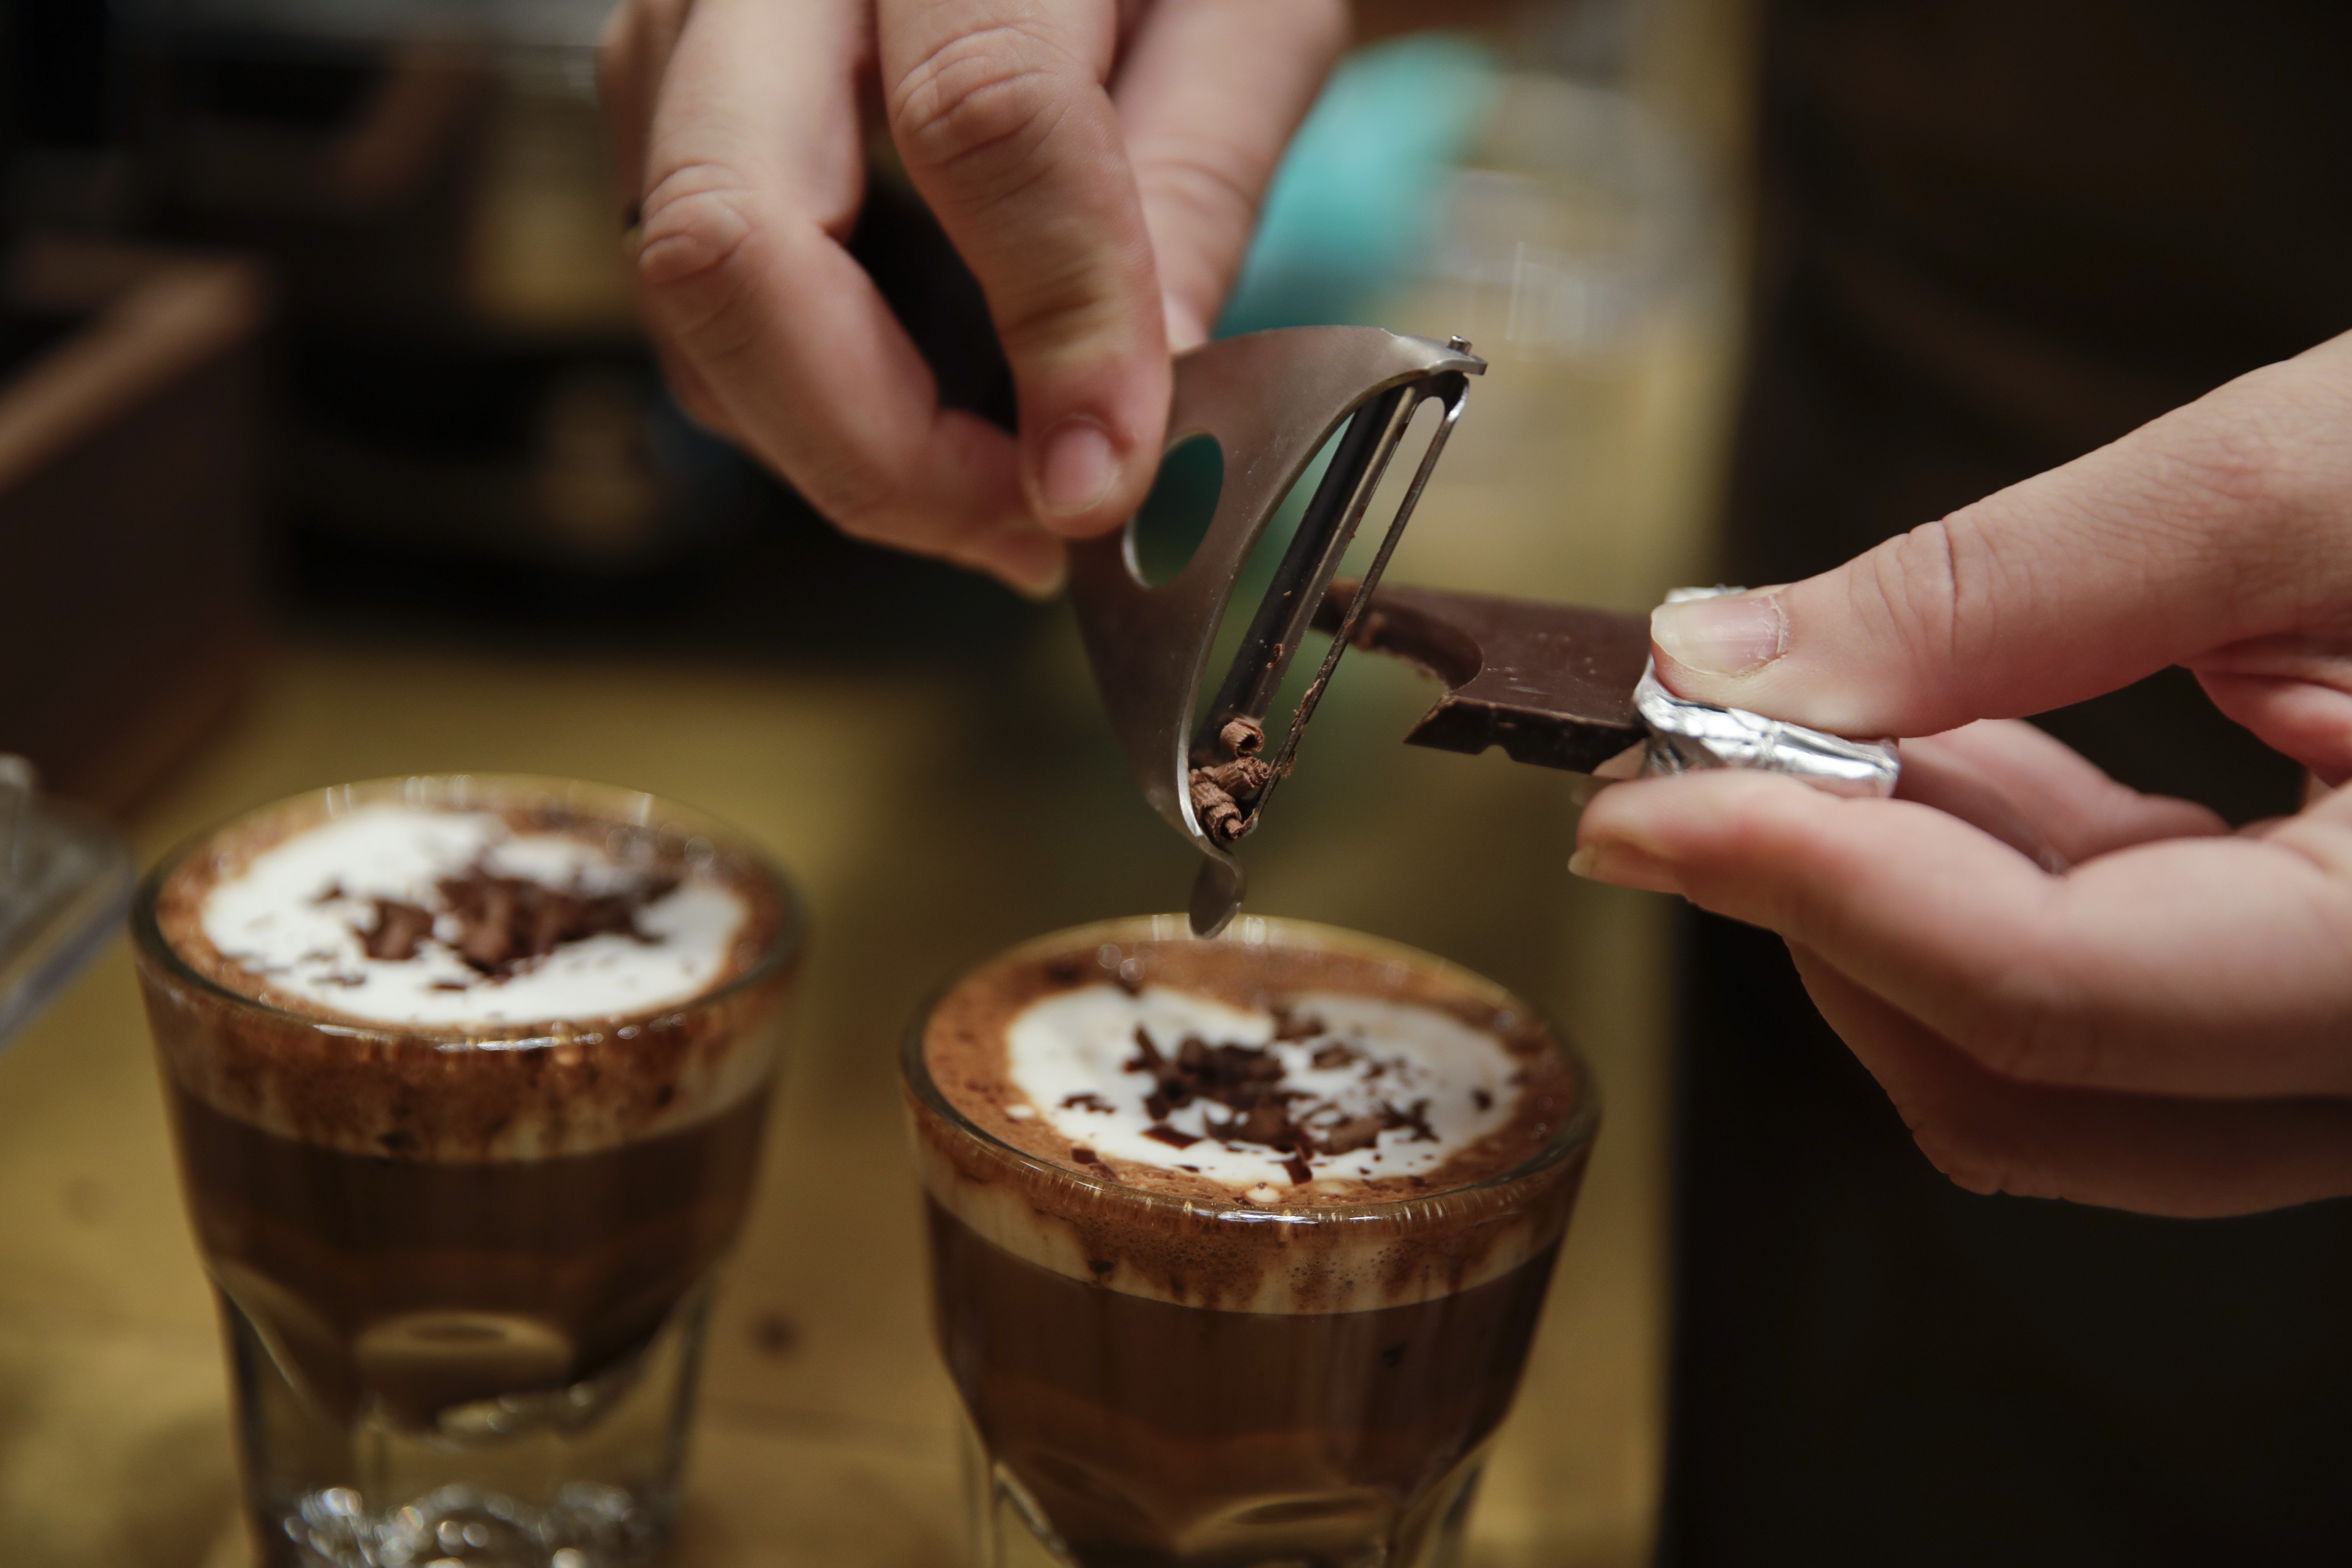 In this photo taken on Tuesday, Sept. 4, 2108, a waiter adds chocolate to coffee cups, at the Starbucks store in Milan, Italy. Starbucks opens its first store in Italy Friday, betting that premium brews and novelties like a heated marble-topped coffee bar will win patrons in a country fond of its espresso rituals. Decades ago, Milan’s coffee bars had inspired the chain’s vision. Starbucks hopes clients will linger at Starbucks Reserve Roastery, where they can watch beans being roasted, sip Reserve coffee or have cocktails at a mezzanine-level bar in a cavernous space that once was a post office near the city’s Duomo, or cathedral. (AP Photo/Luca Bruno)